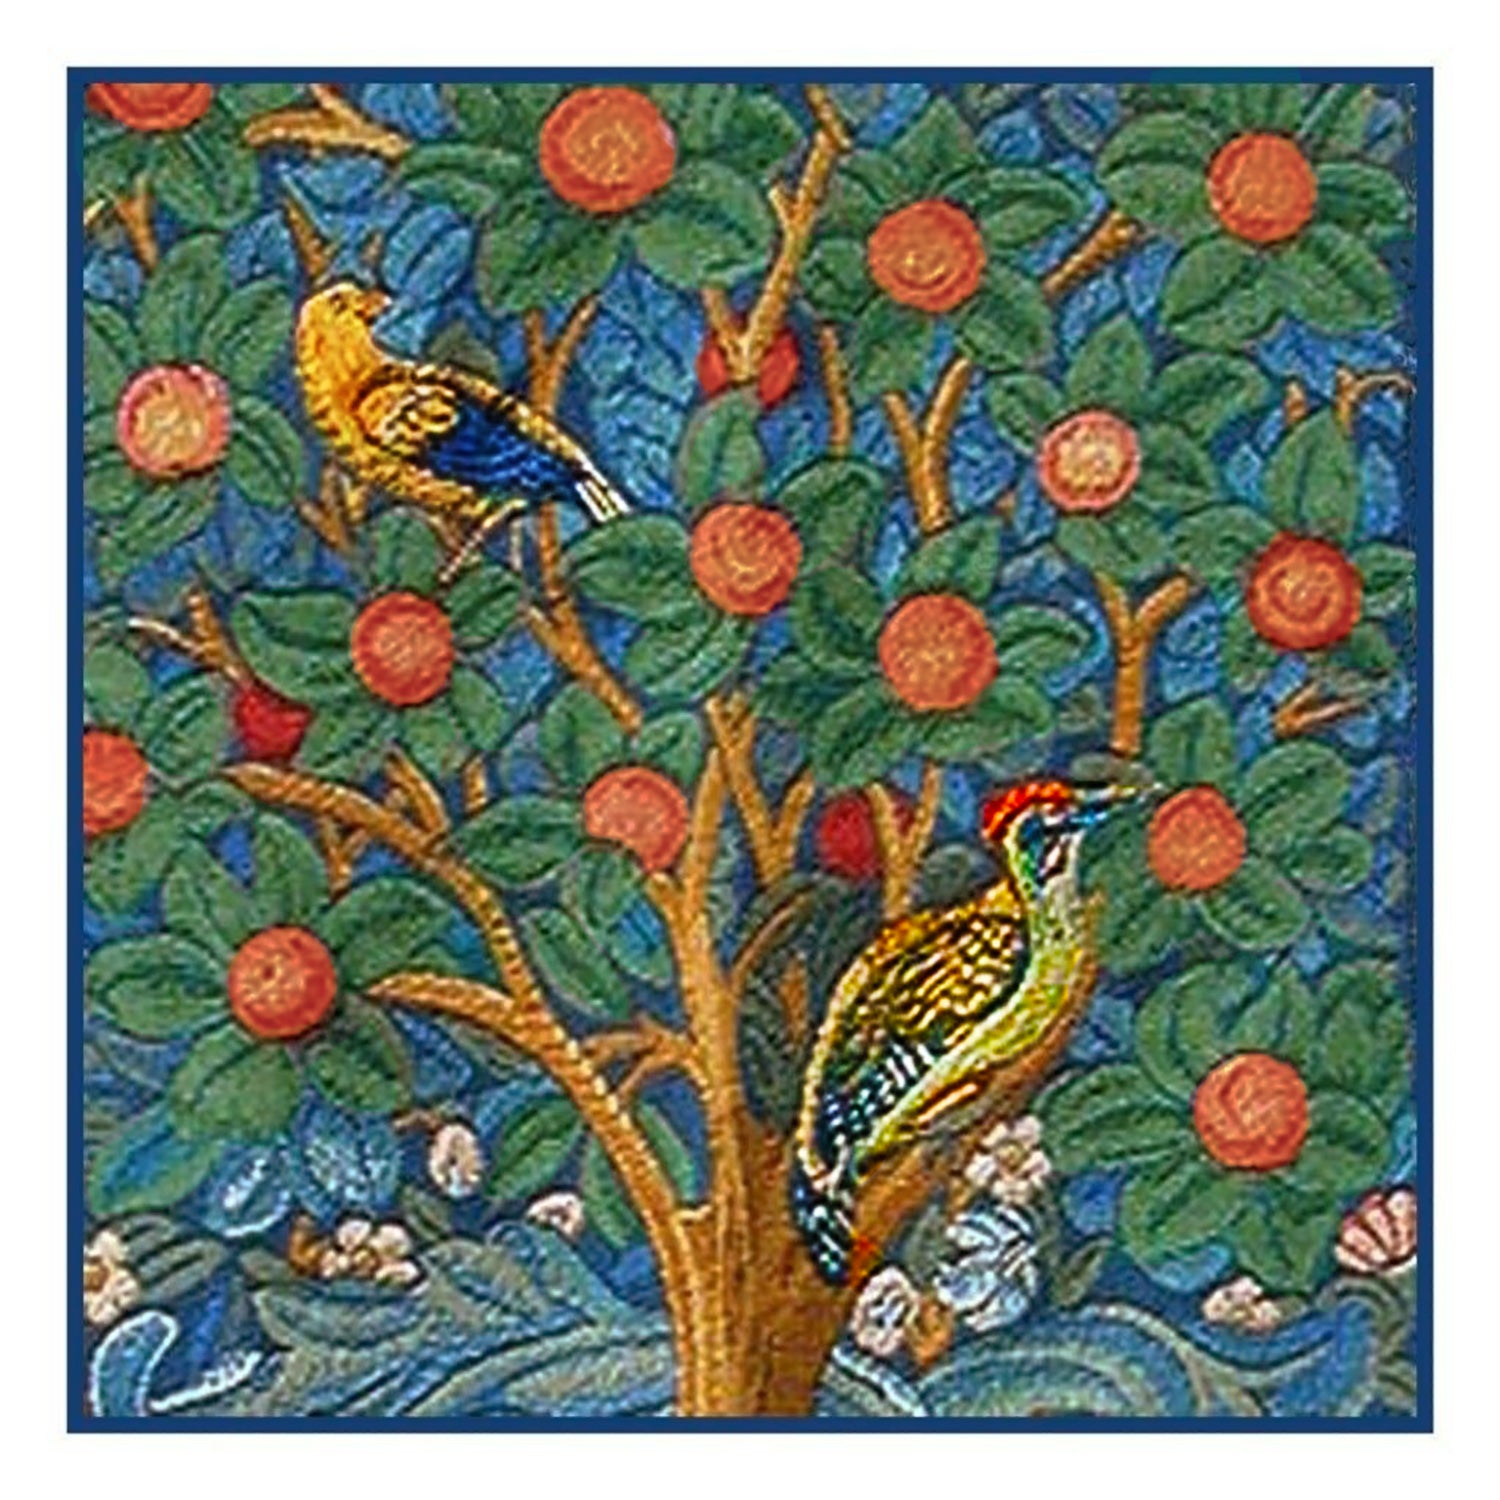 Tree of Life detail by Arts and Crafts Movement Founder William Morris